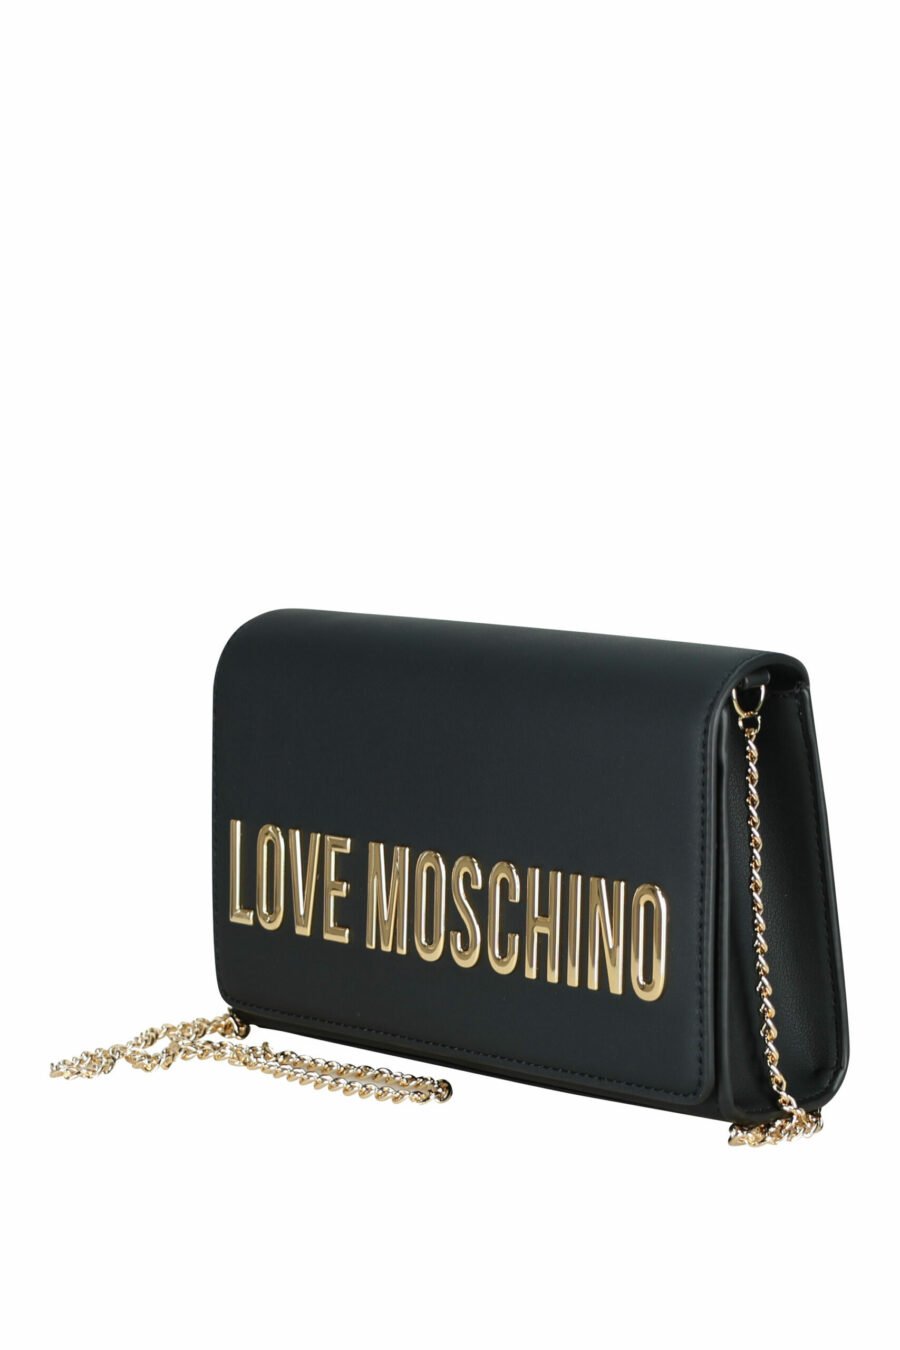 Black shoulder bag with chain and maxilogo "lettering" - 8050537396925 1 scaled